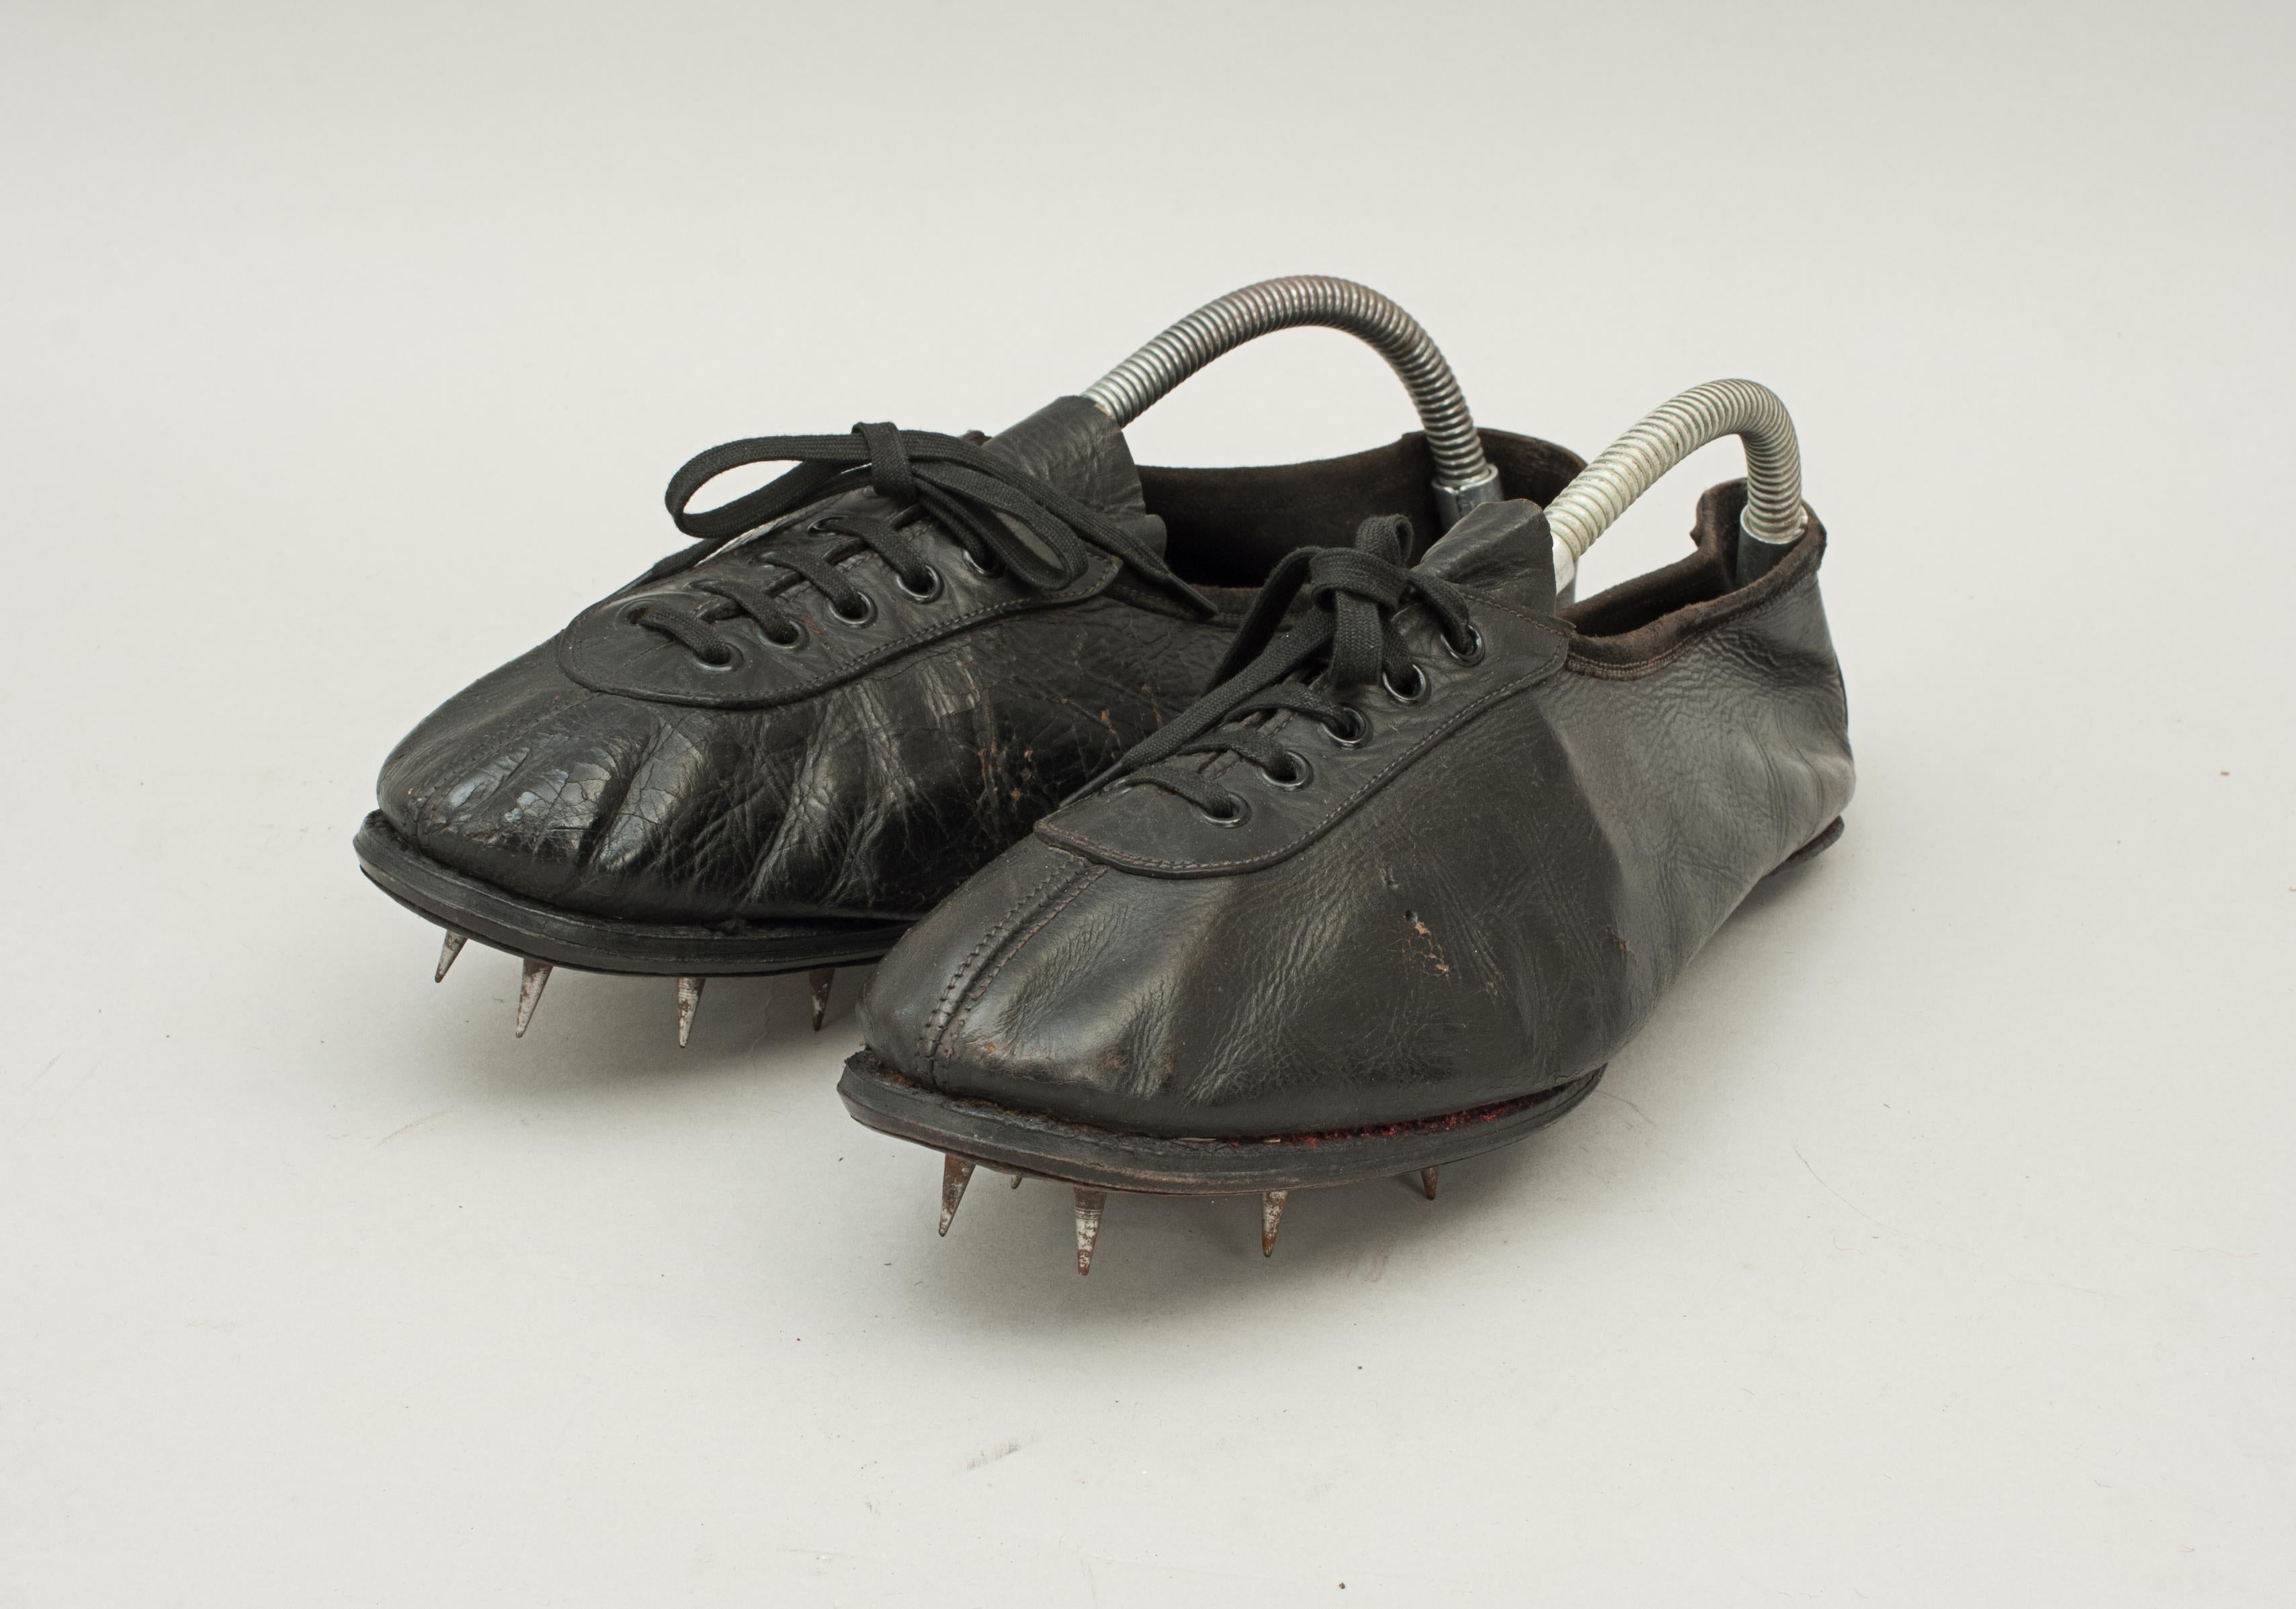 Vintage running spikes.
A pair of all black leather running, sprinting, athletic shoes. The size 8 leather soled running spikes are in good condition and have 6 1½ cm metal spikes in each sole. These sprint shoes would make a great present for a